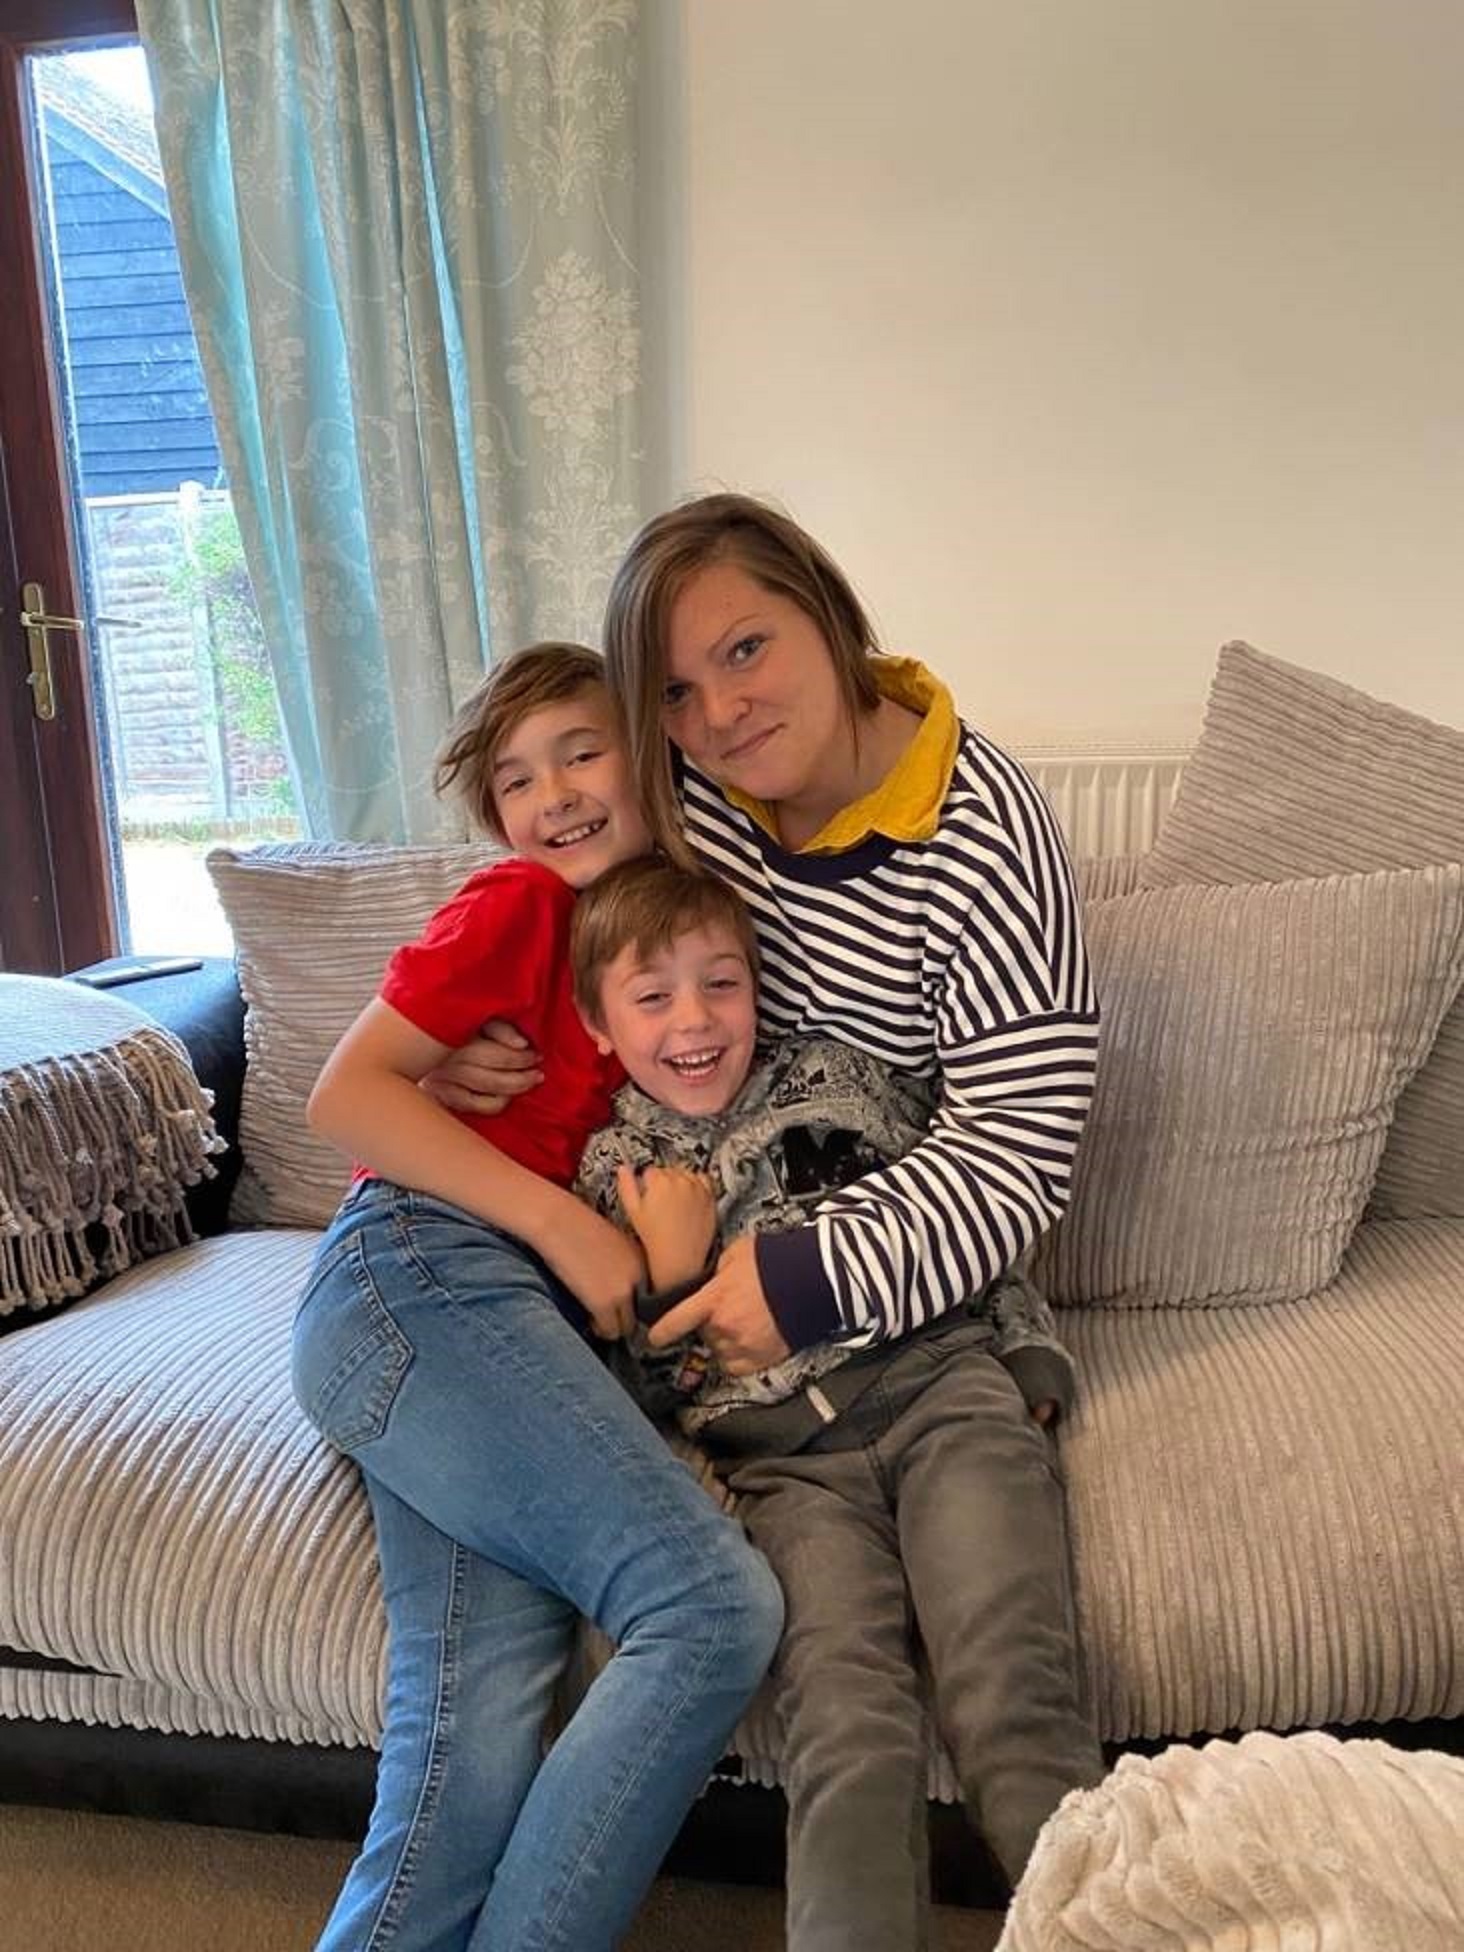 Sarah Smith, pictured with her nephews, gave a home to a child during the coronavirus pandemic